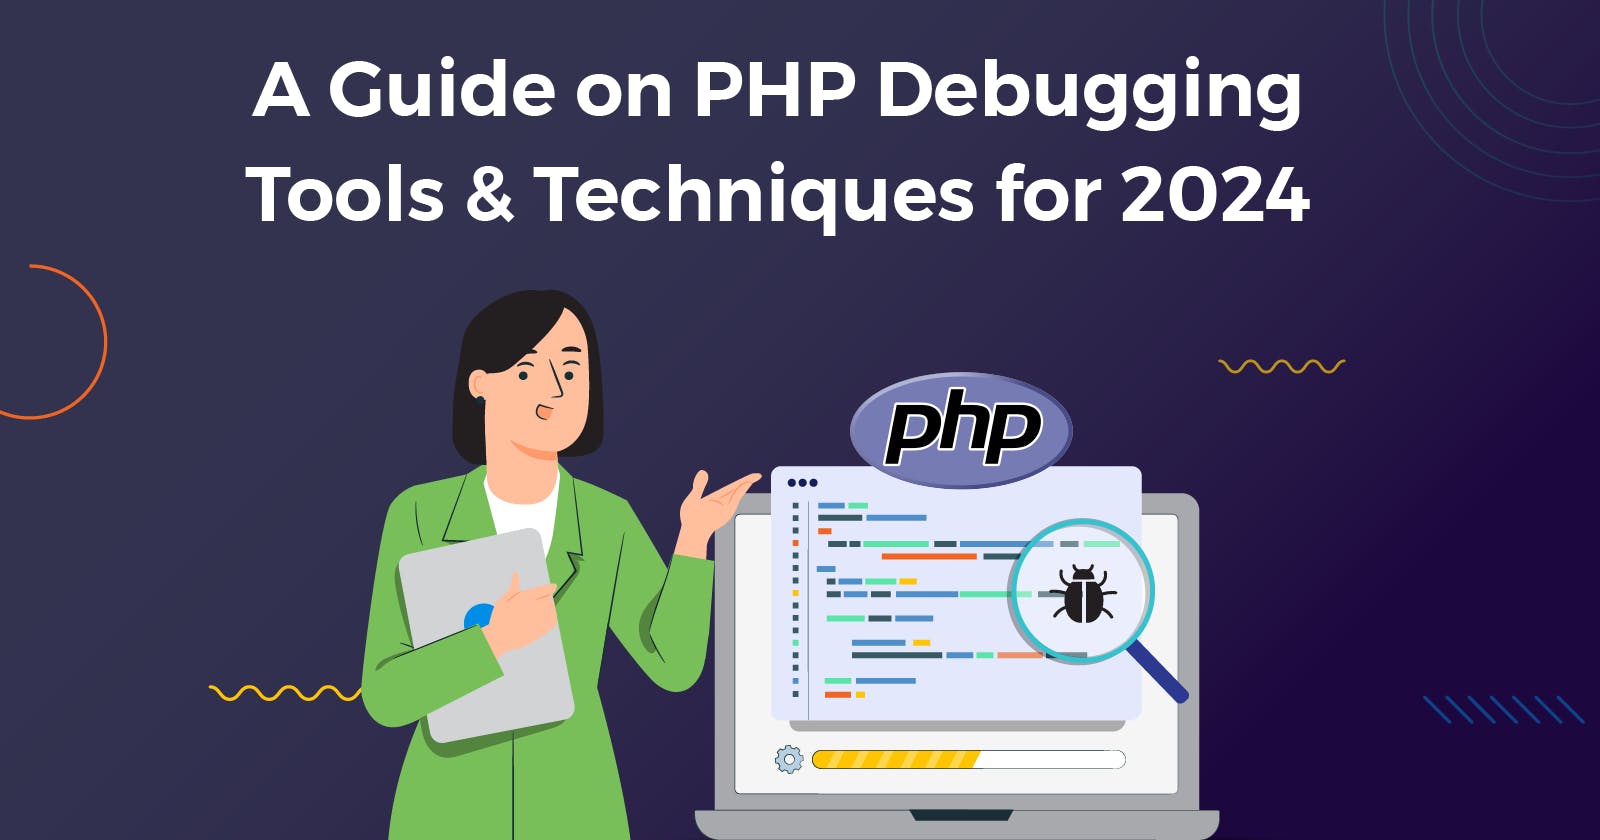 A Guide on PHP Debugging Tools & Techniques for 2024